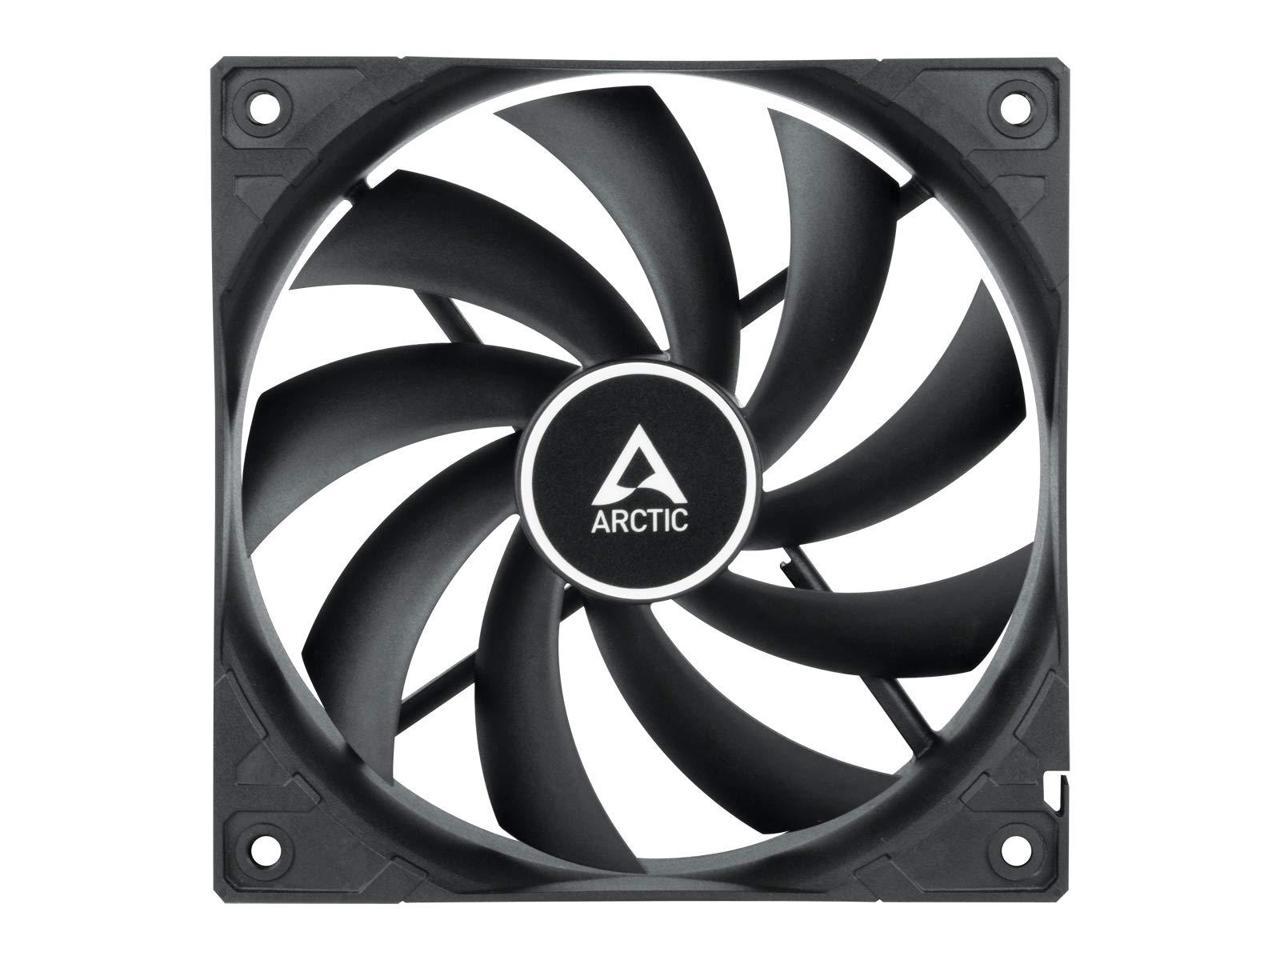 ARCTIC F12 PWM PST (5 Pack) - 120 mm PWM PST Case Fan with PWM Sharing Technology (PST), Quiet Motor, Computer, Fan Speed: 230-1350 RPM - Black